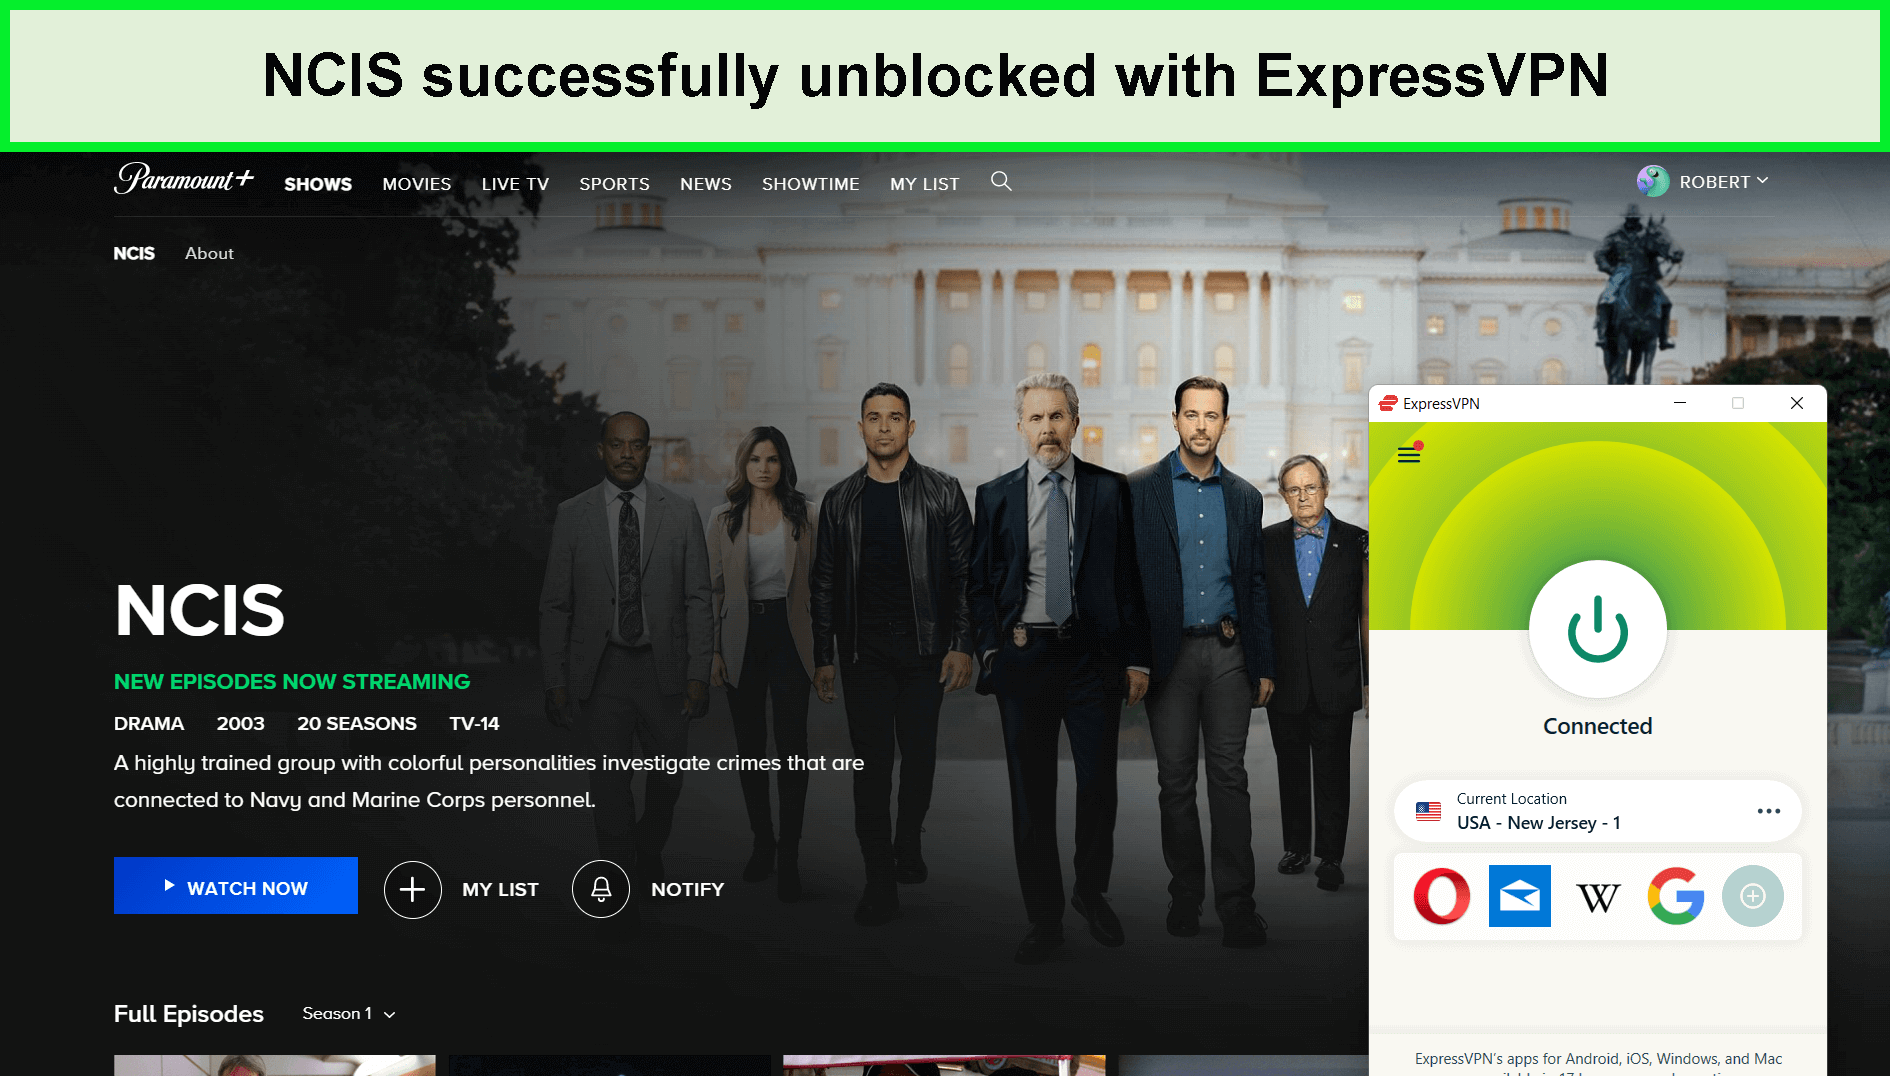 ncis-successfully-unblocked-with-expressvpn-outside-usa-on-paramount-plus